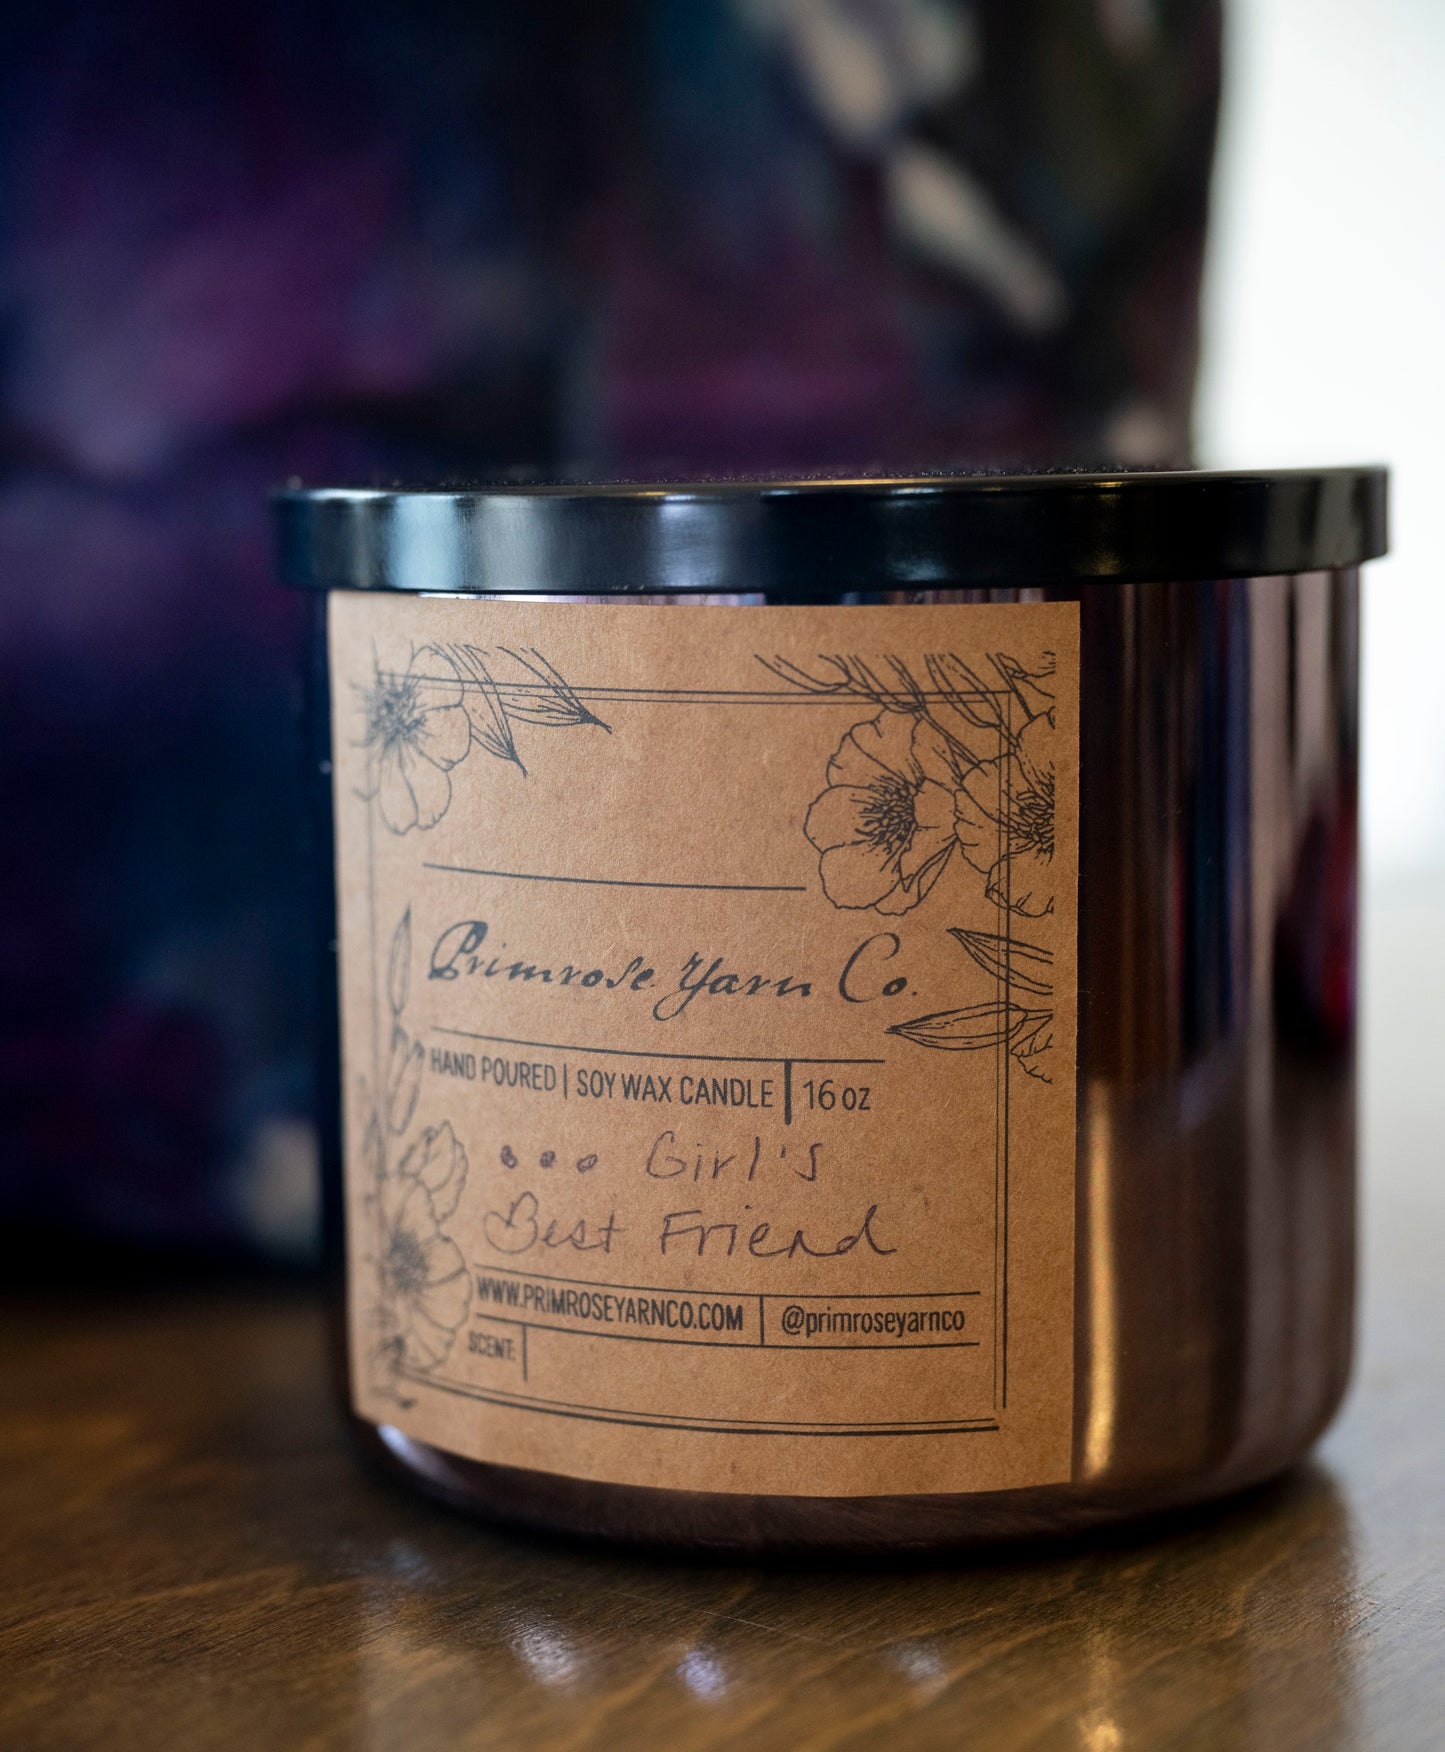 '...Girl's Best Friend' *LIMITED EDITION* 10 Year Anniversary Candle